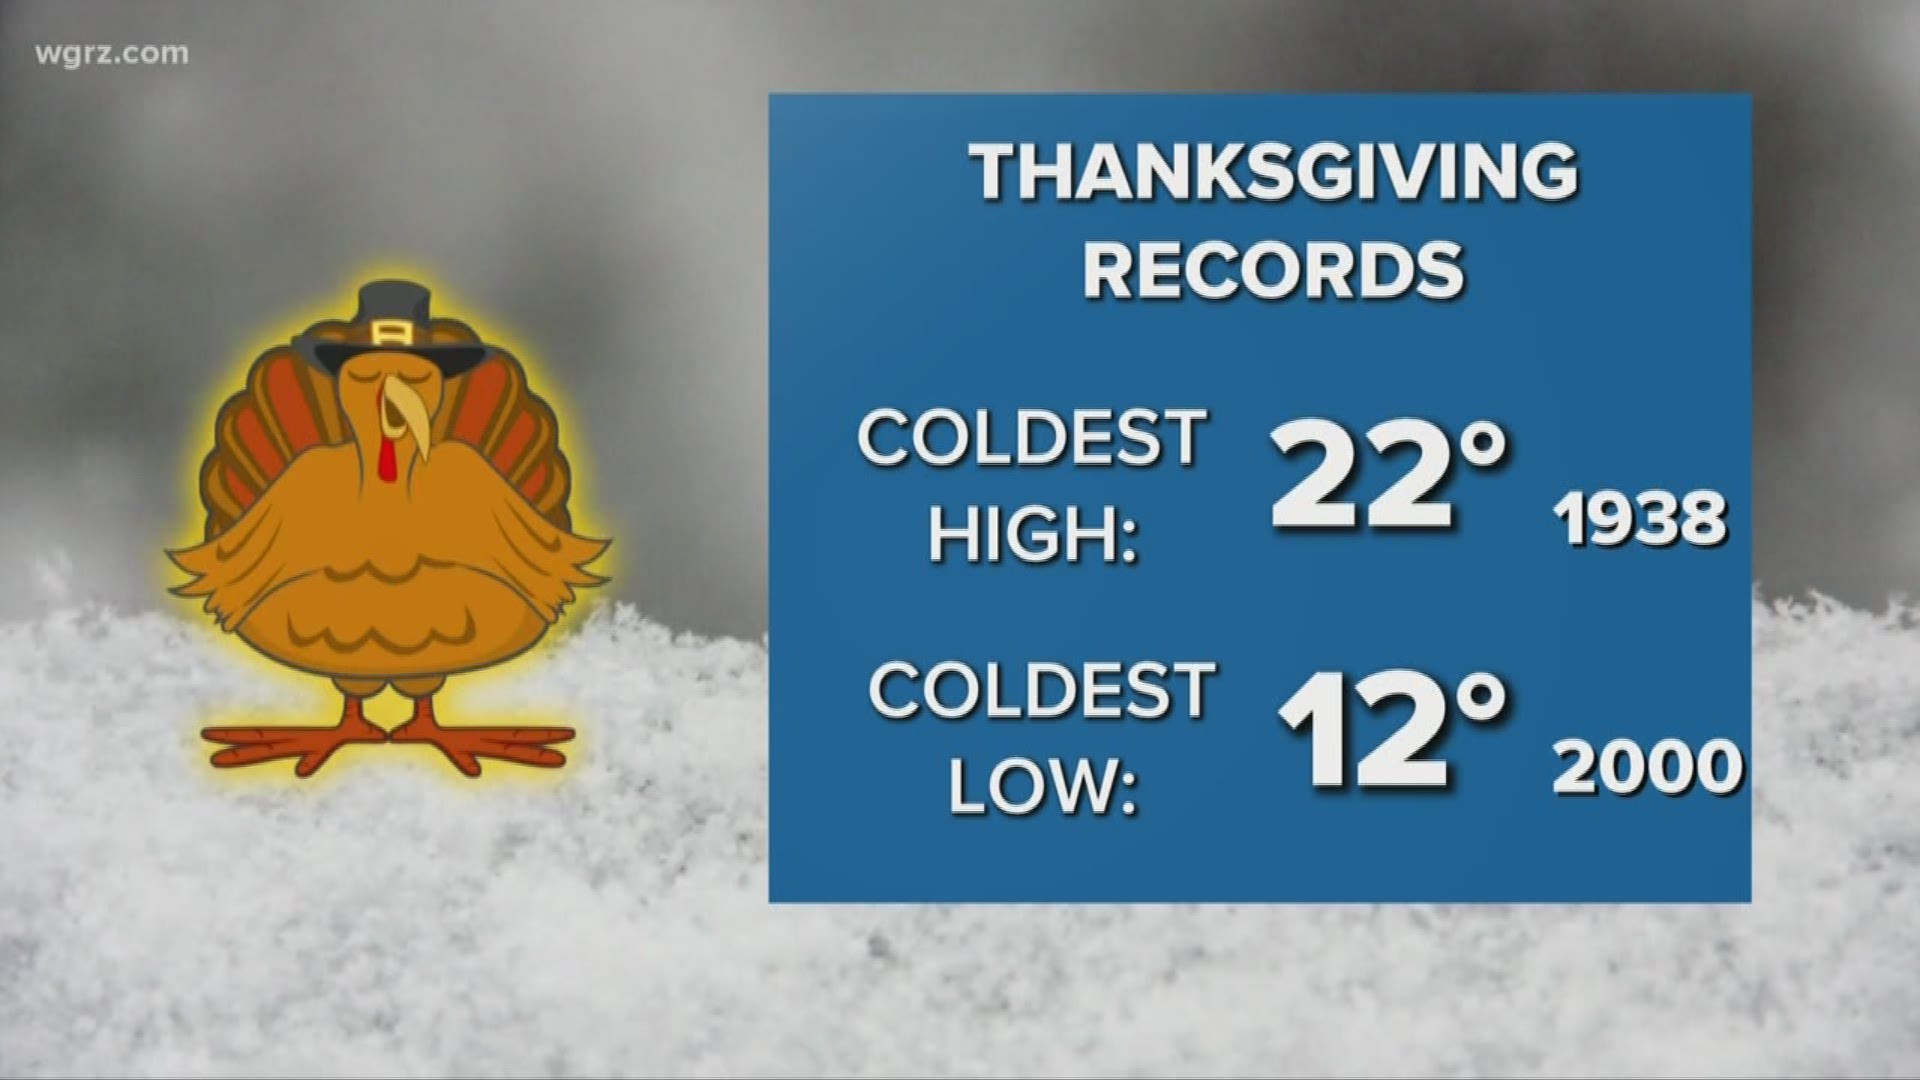 Thanksgiving Day could bring record cold